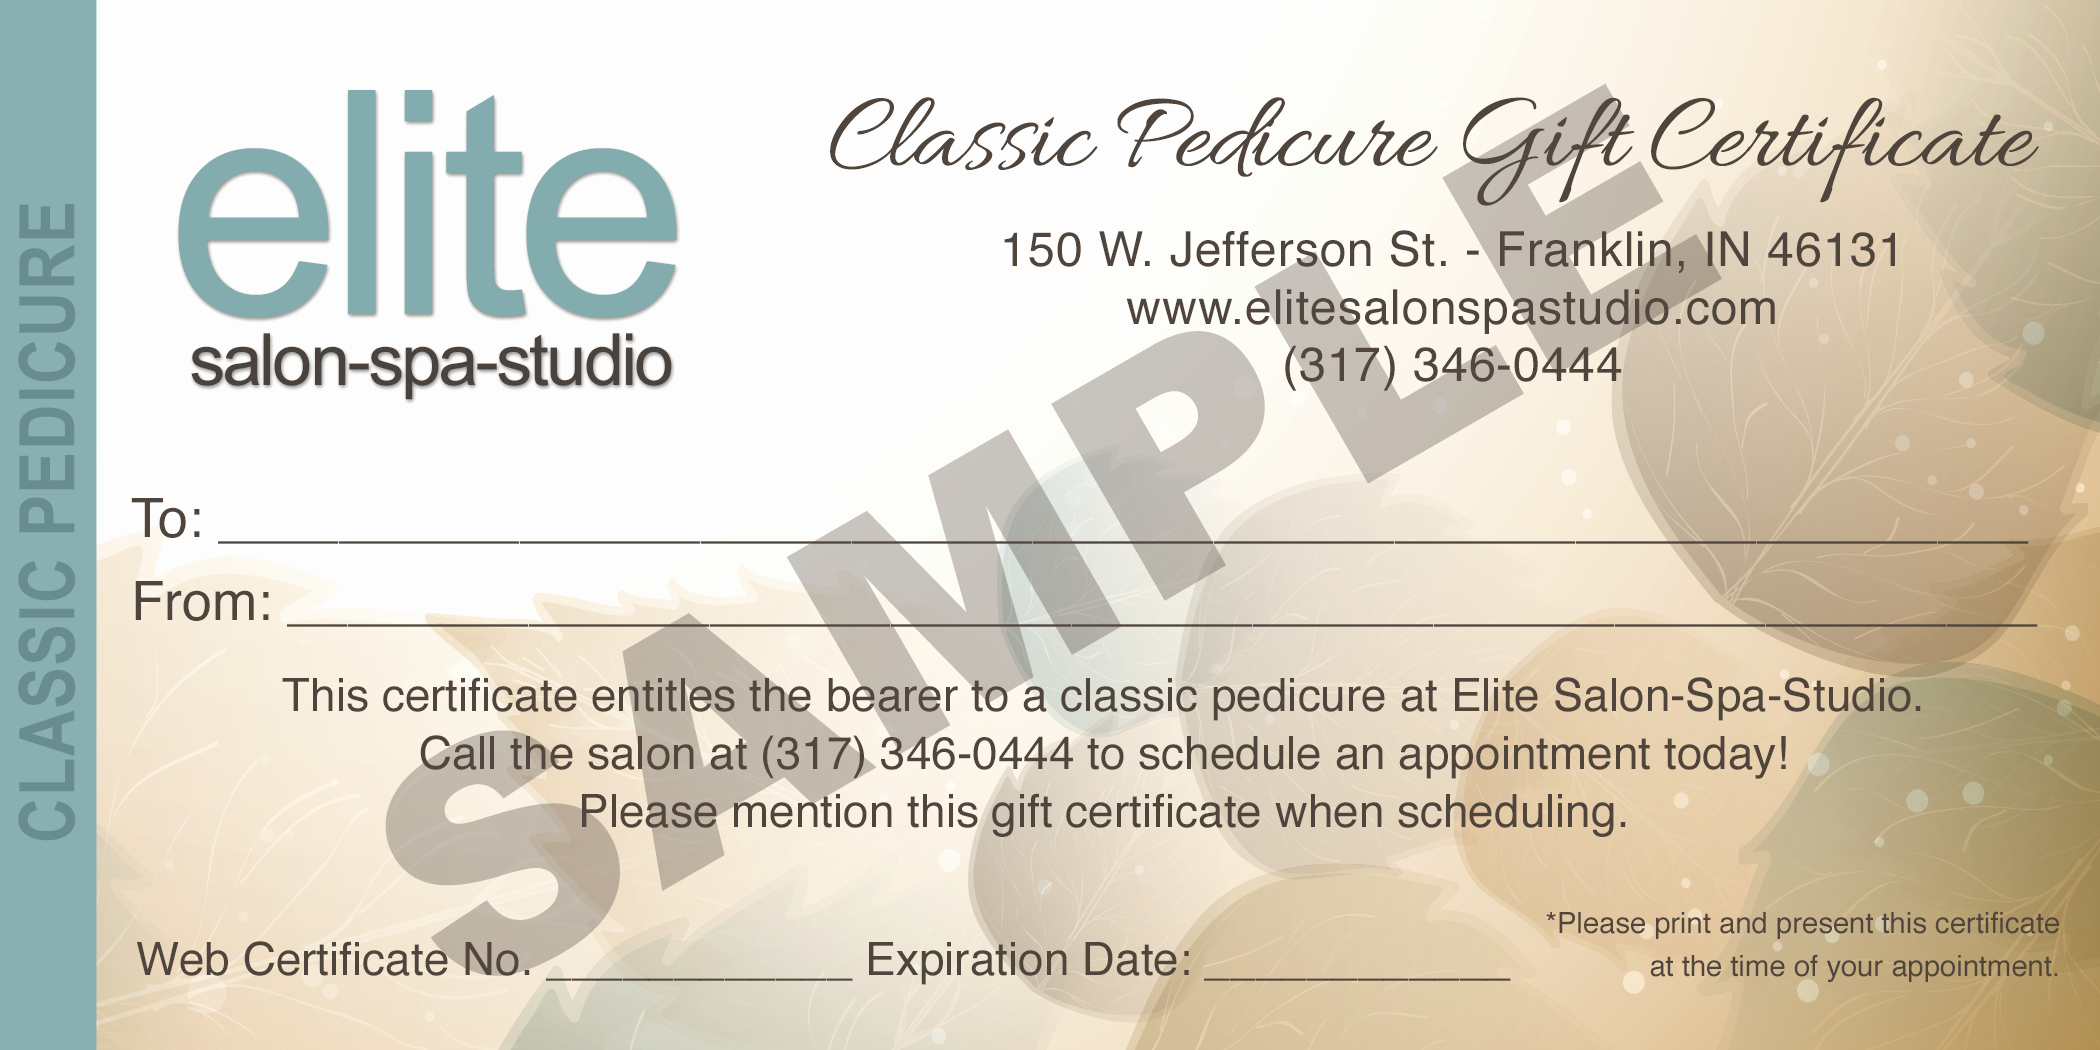 30 Mani Pedi Gift Certificate Template | Pryncepality Throughout This Certificate Entitles The Bearer To Template